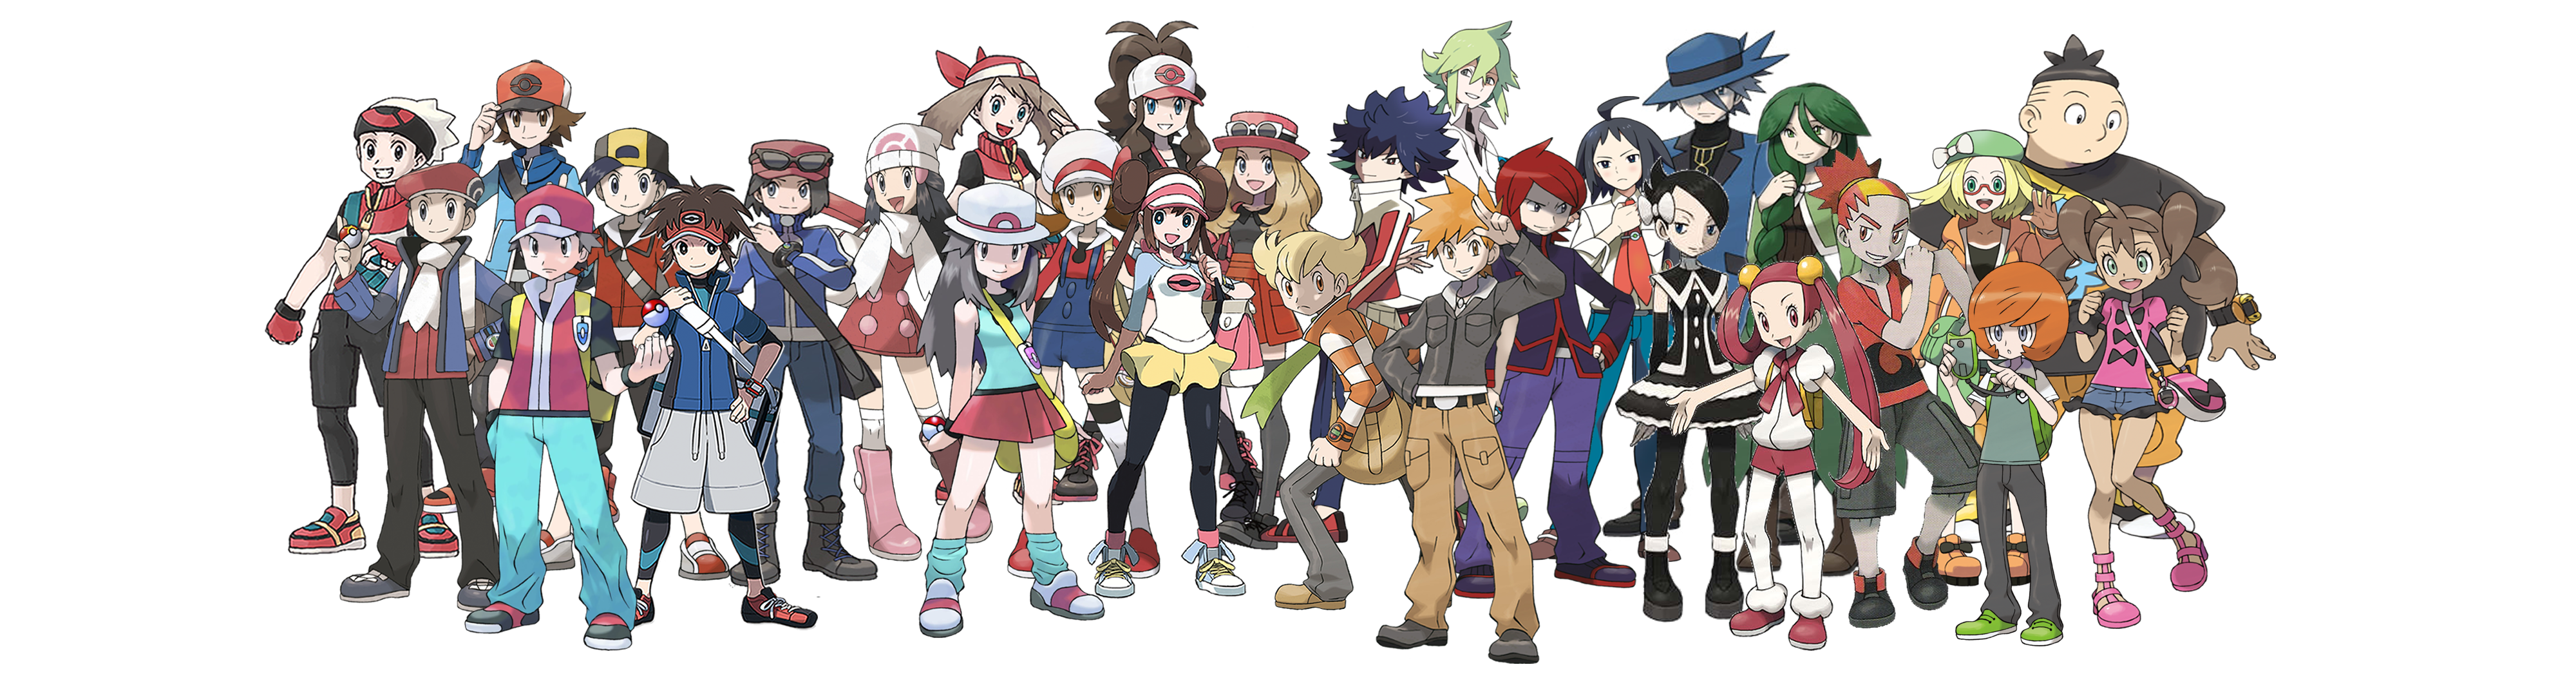 Pokemon Trainers Rivals Supporting By Nintendofandj On